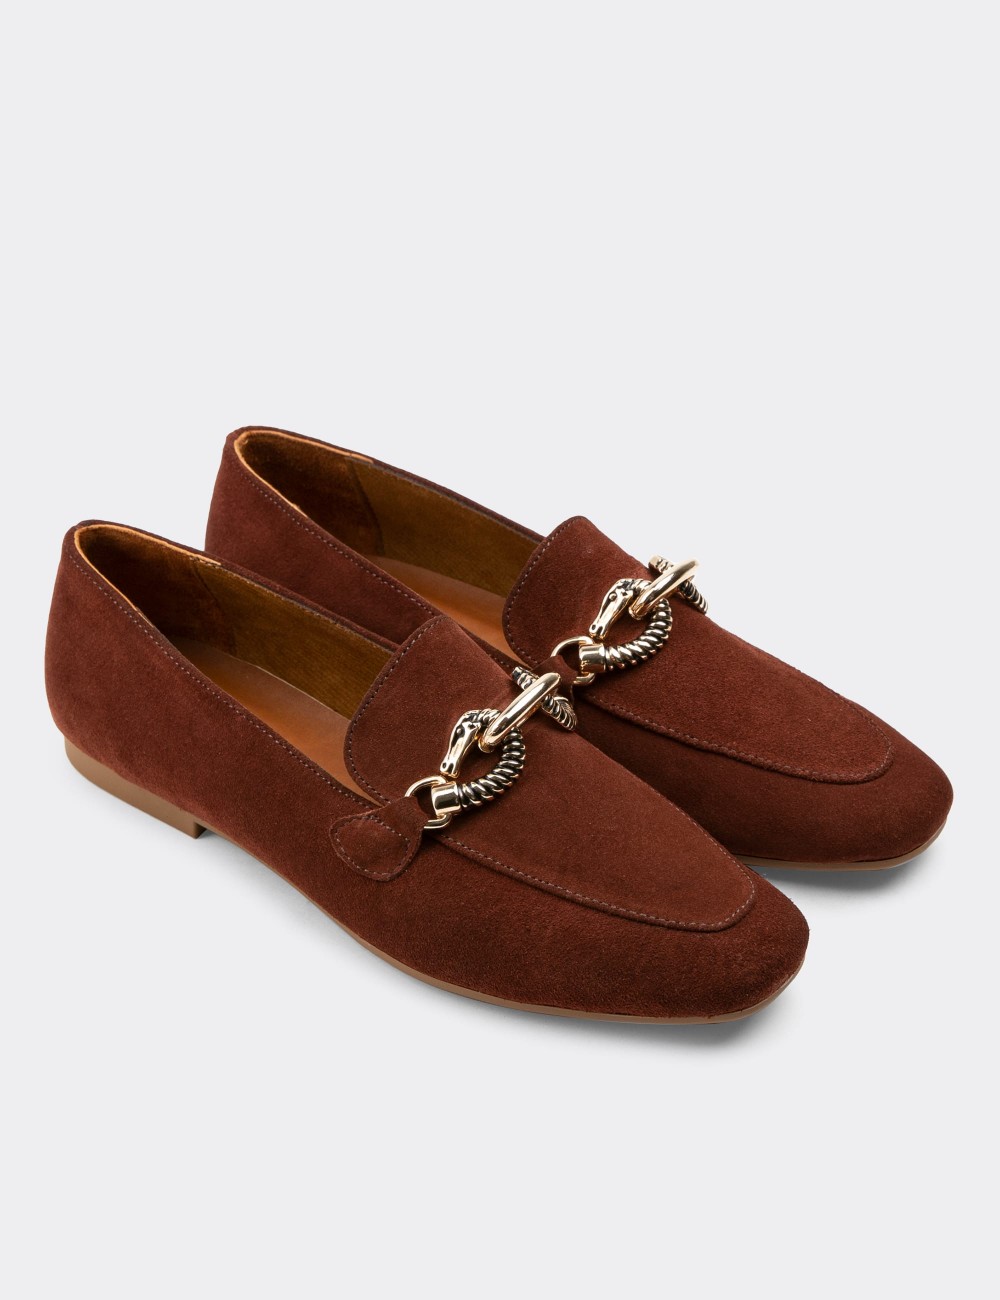 Tan Suede Leather Loafers - 01912ZTBAC01